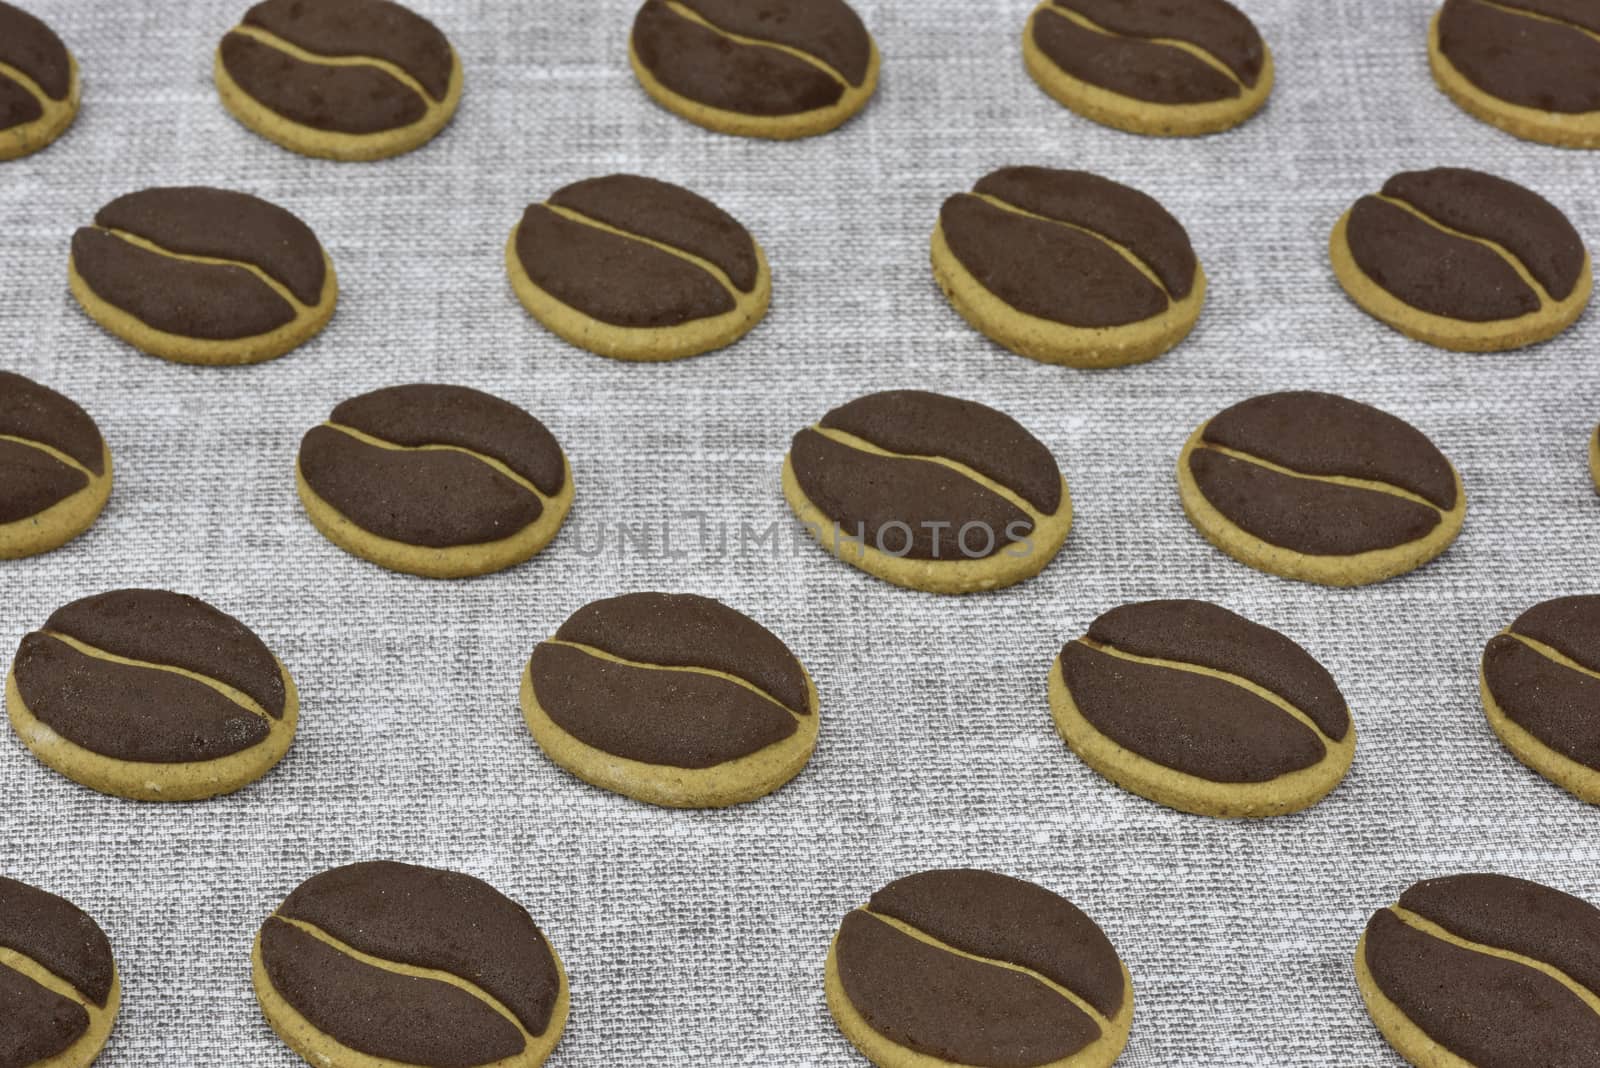 Delicious coffee cookies arranged on a tablecloth